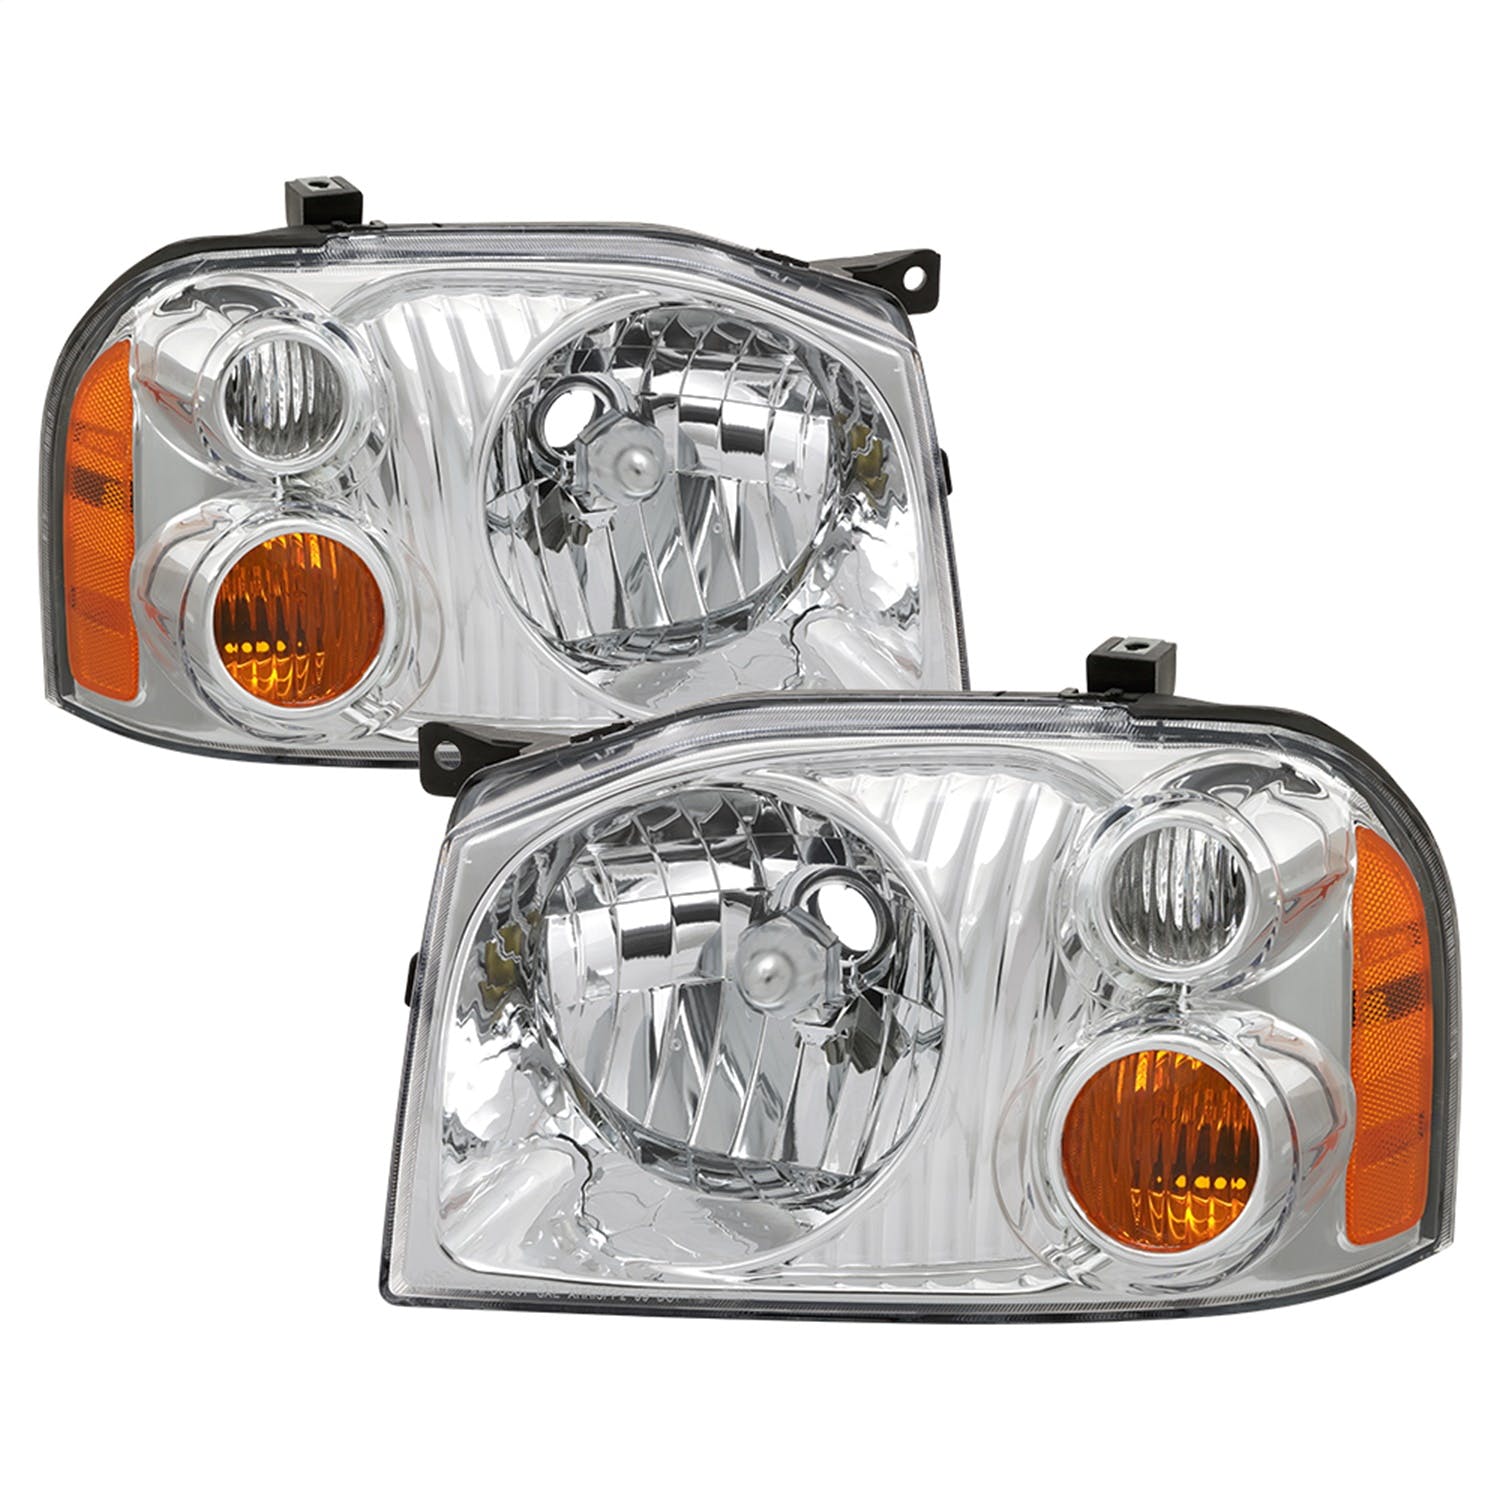 XTUNE POWER 9042775 Nissan Frontier 01 04 OEM Headlights Low Beam 9007(Not Included) ; High Beam 3456(Not Included) ; Signal 168(Not Included) Chrome